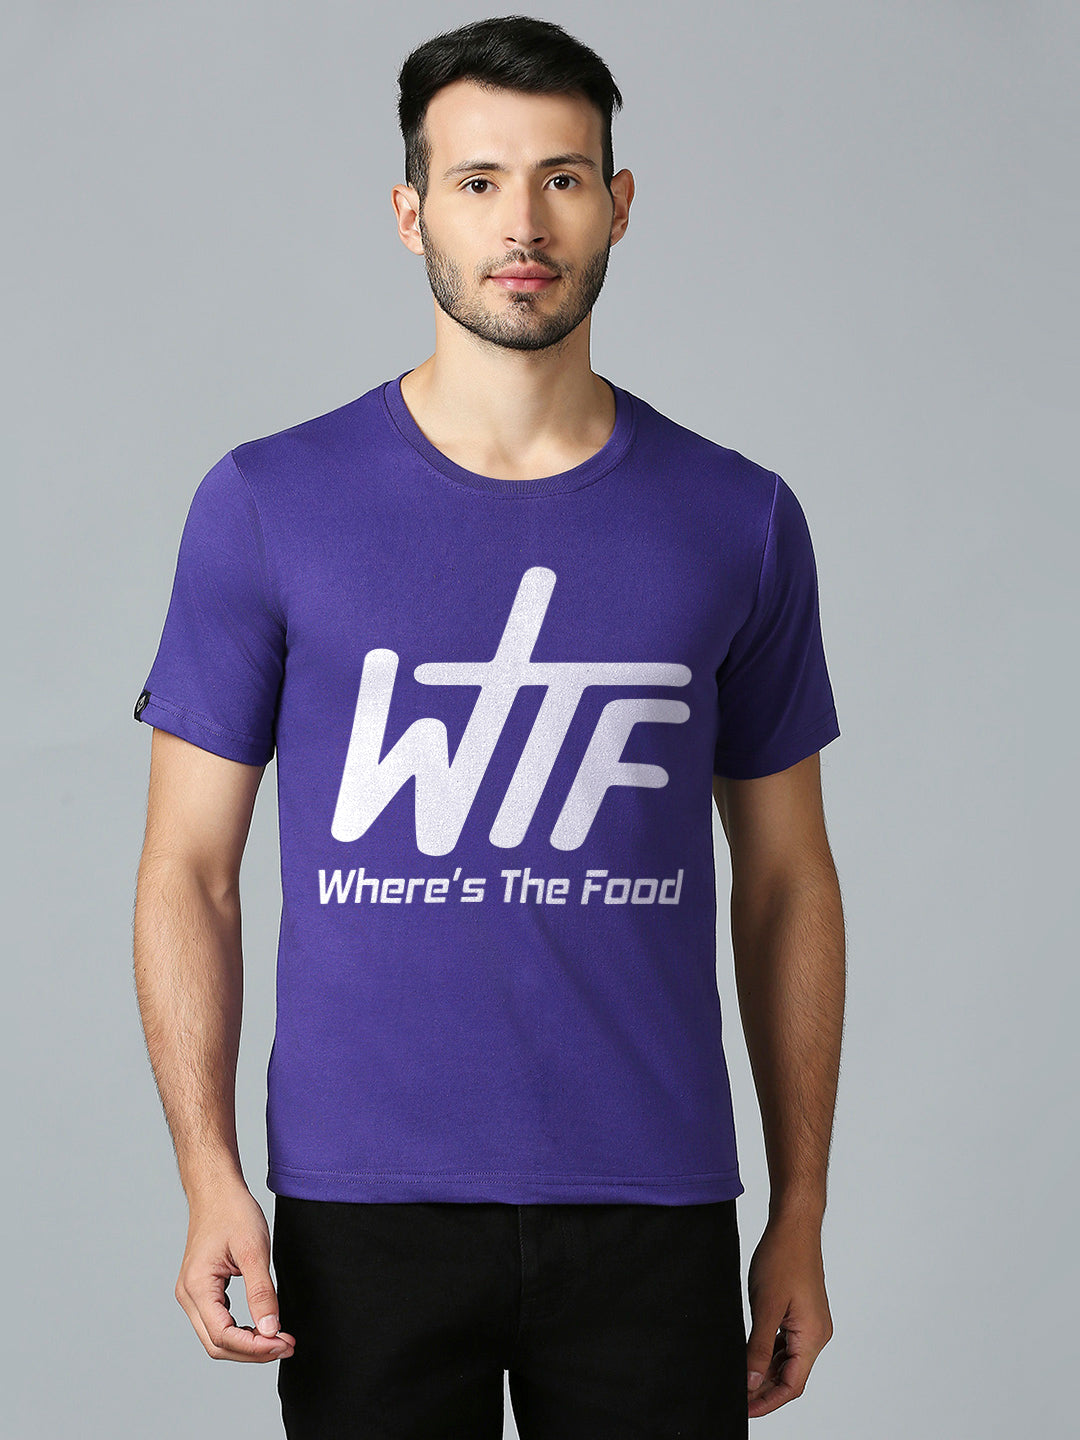 WTF Where's The Food T-Shirt